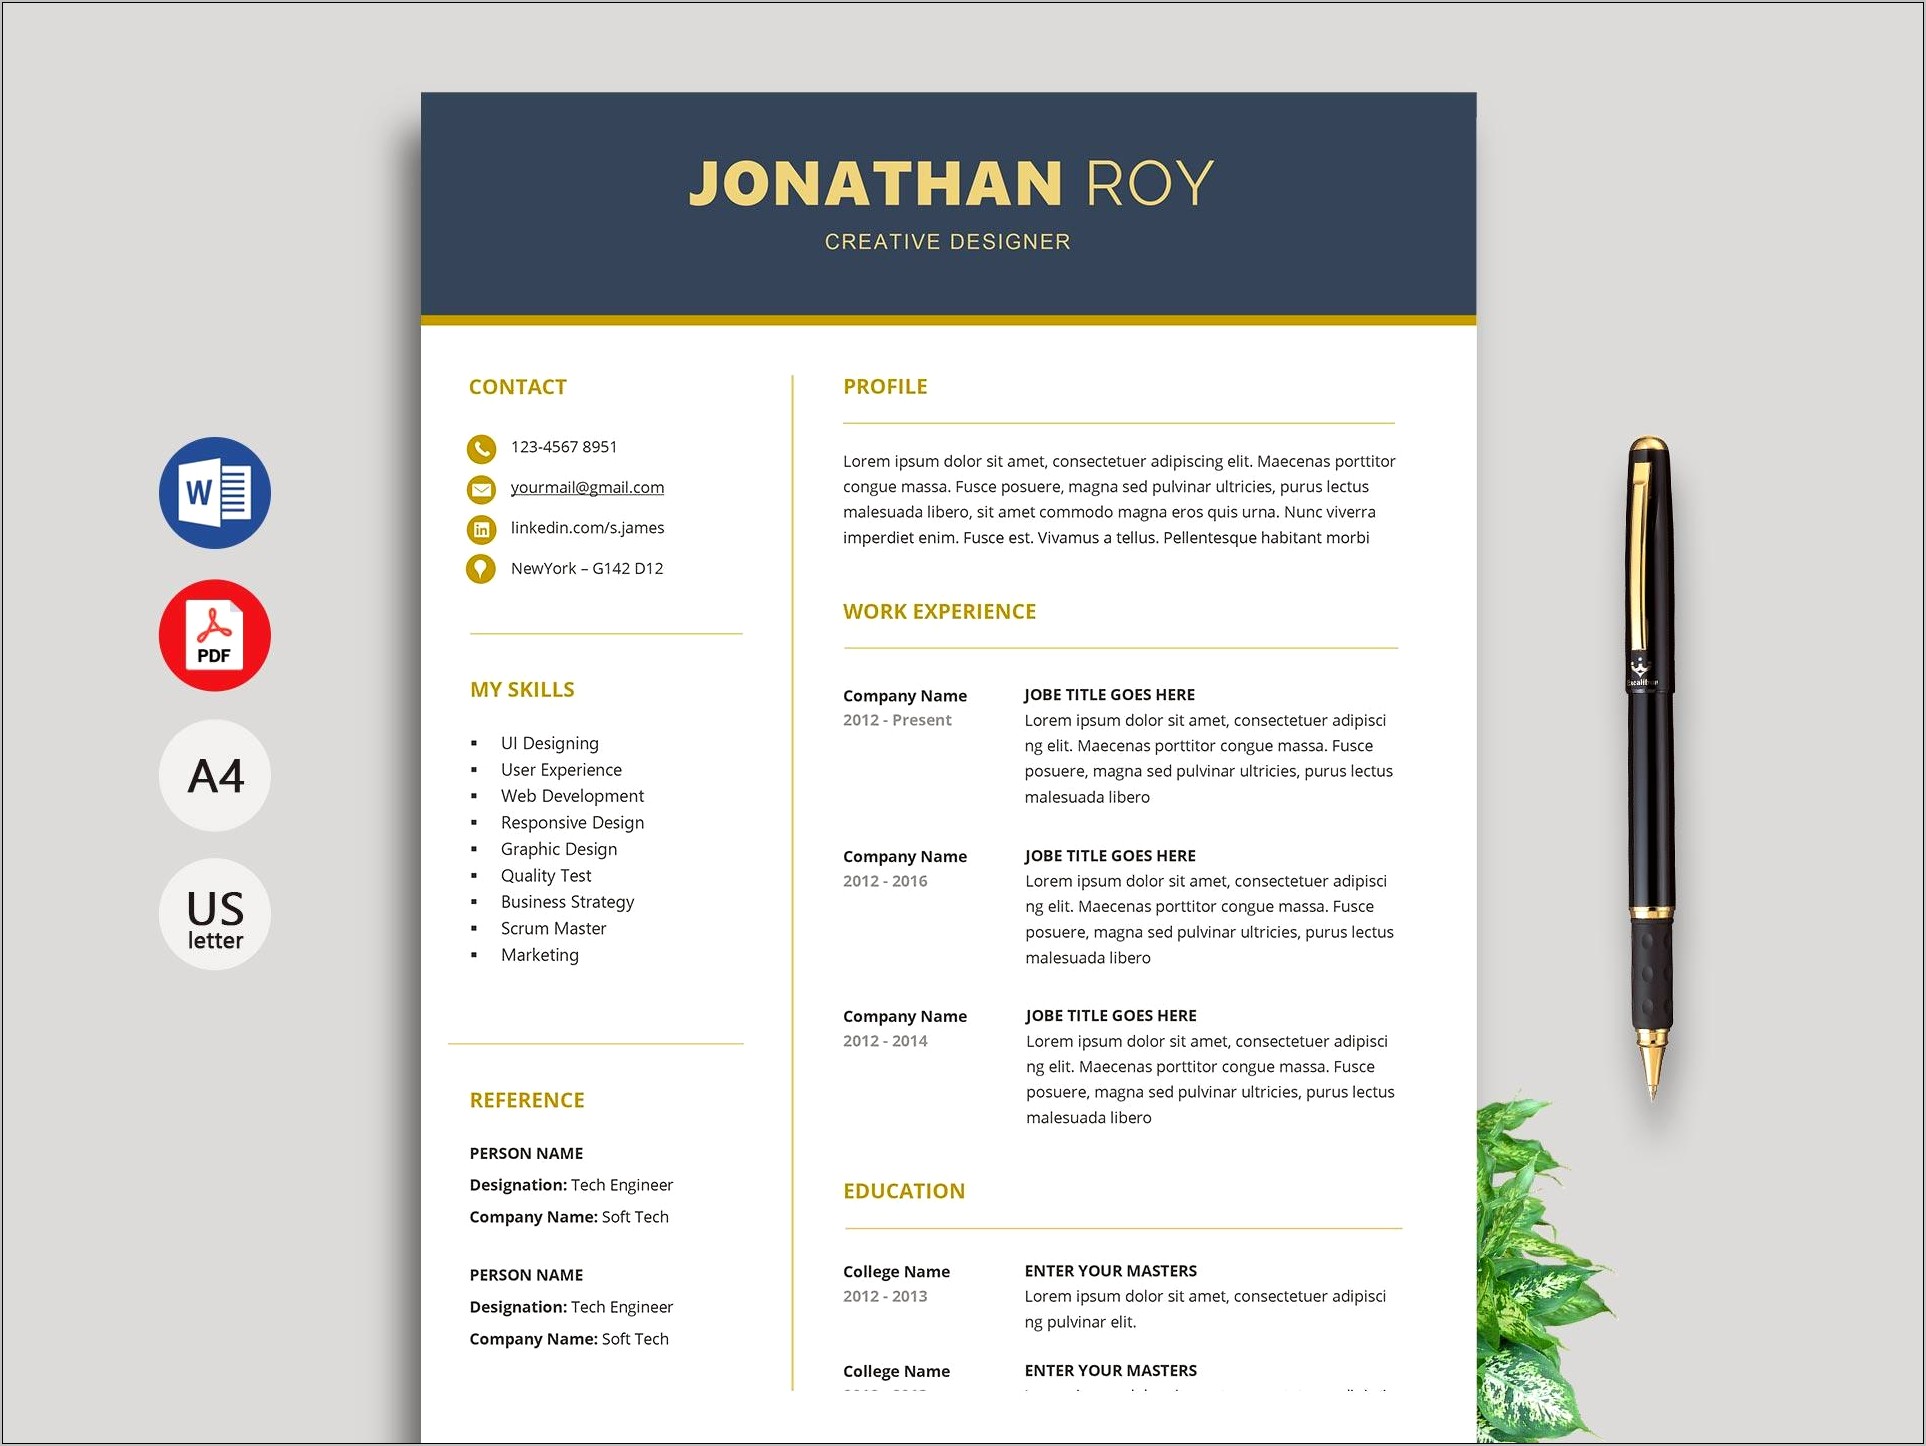 New Updated Resume Format Free Download